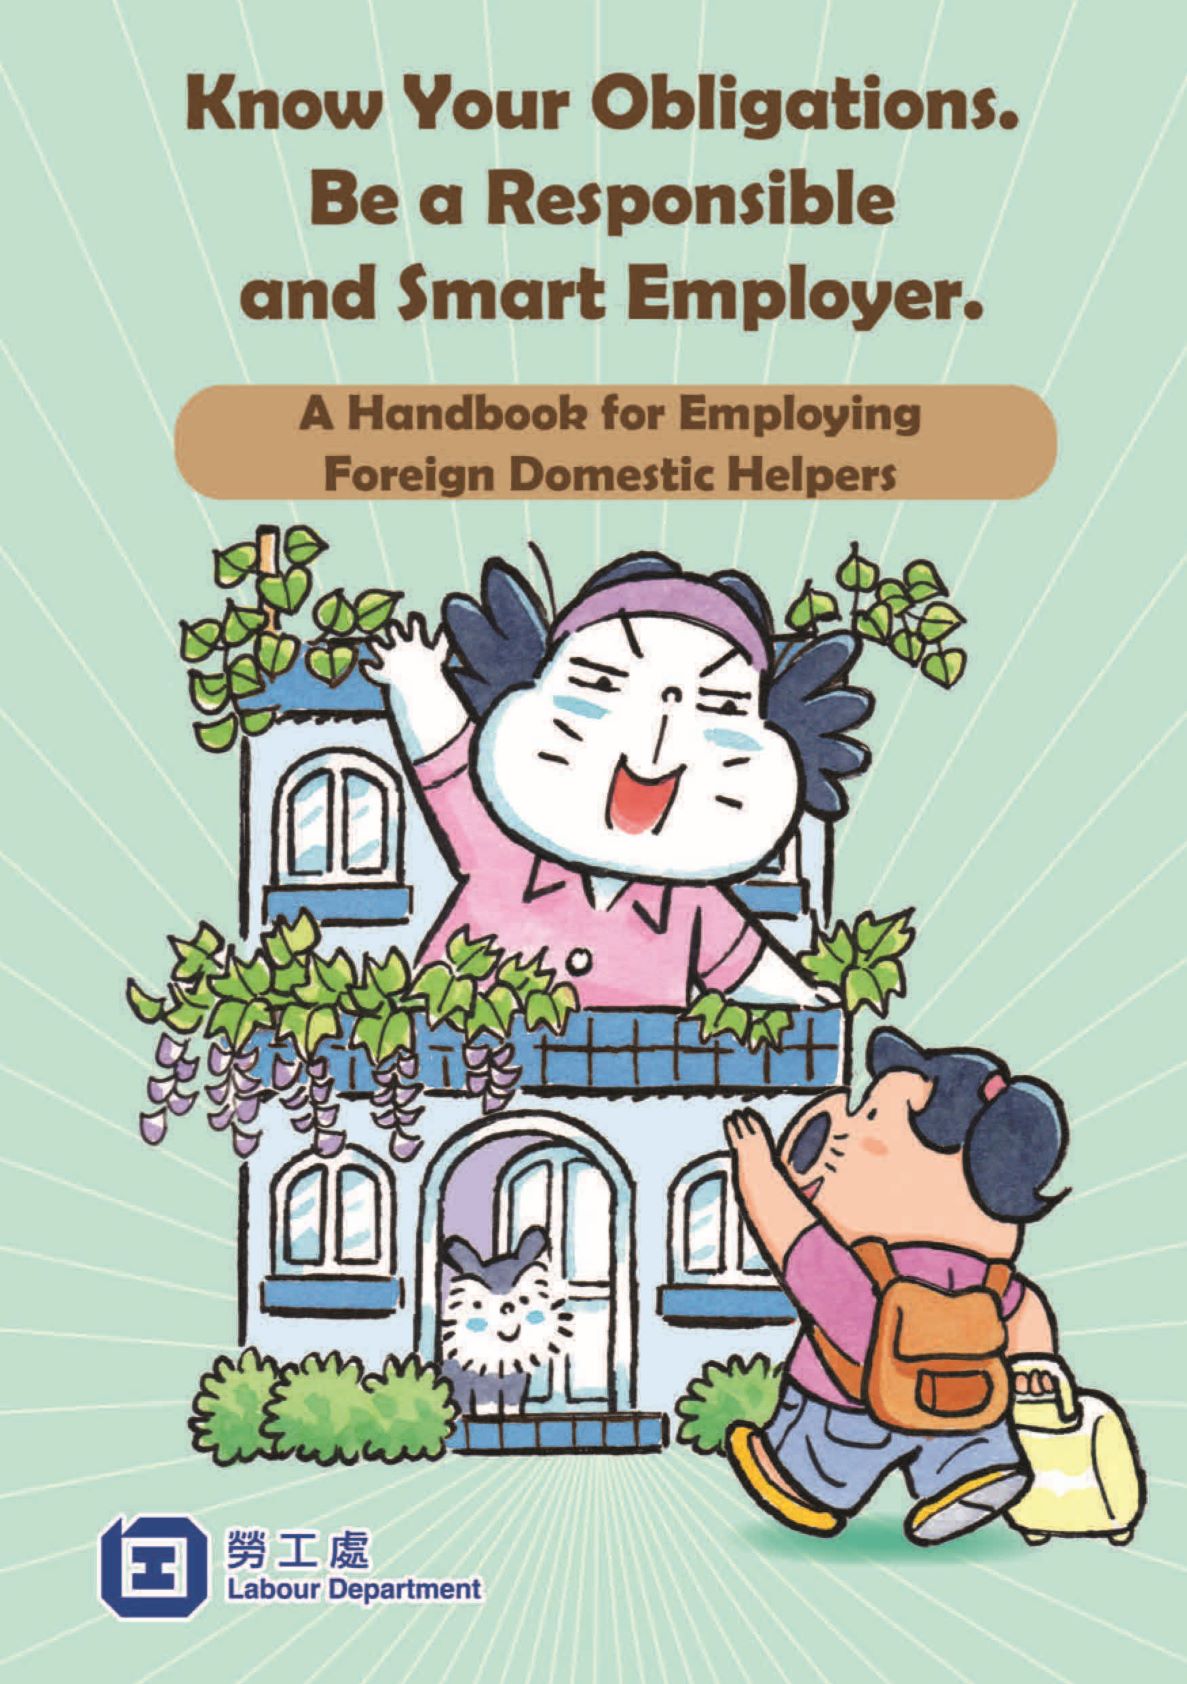 Know Your Obligations. Be a Responsible and Smart Employer. -  A Handbook for employing Foreign Domestic Helpers